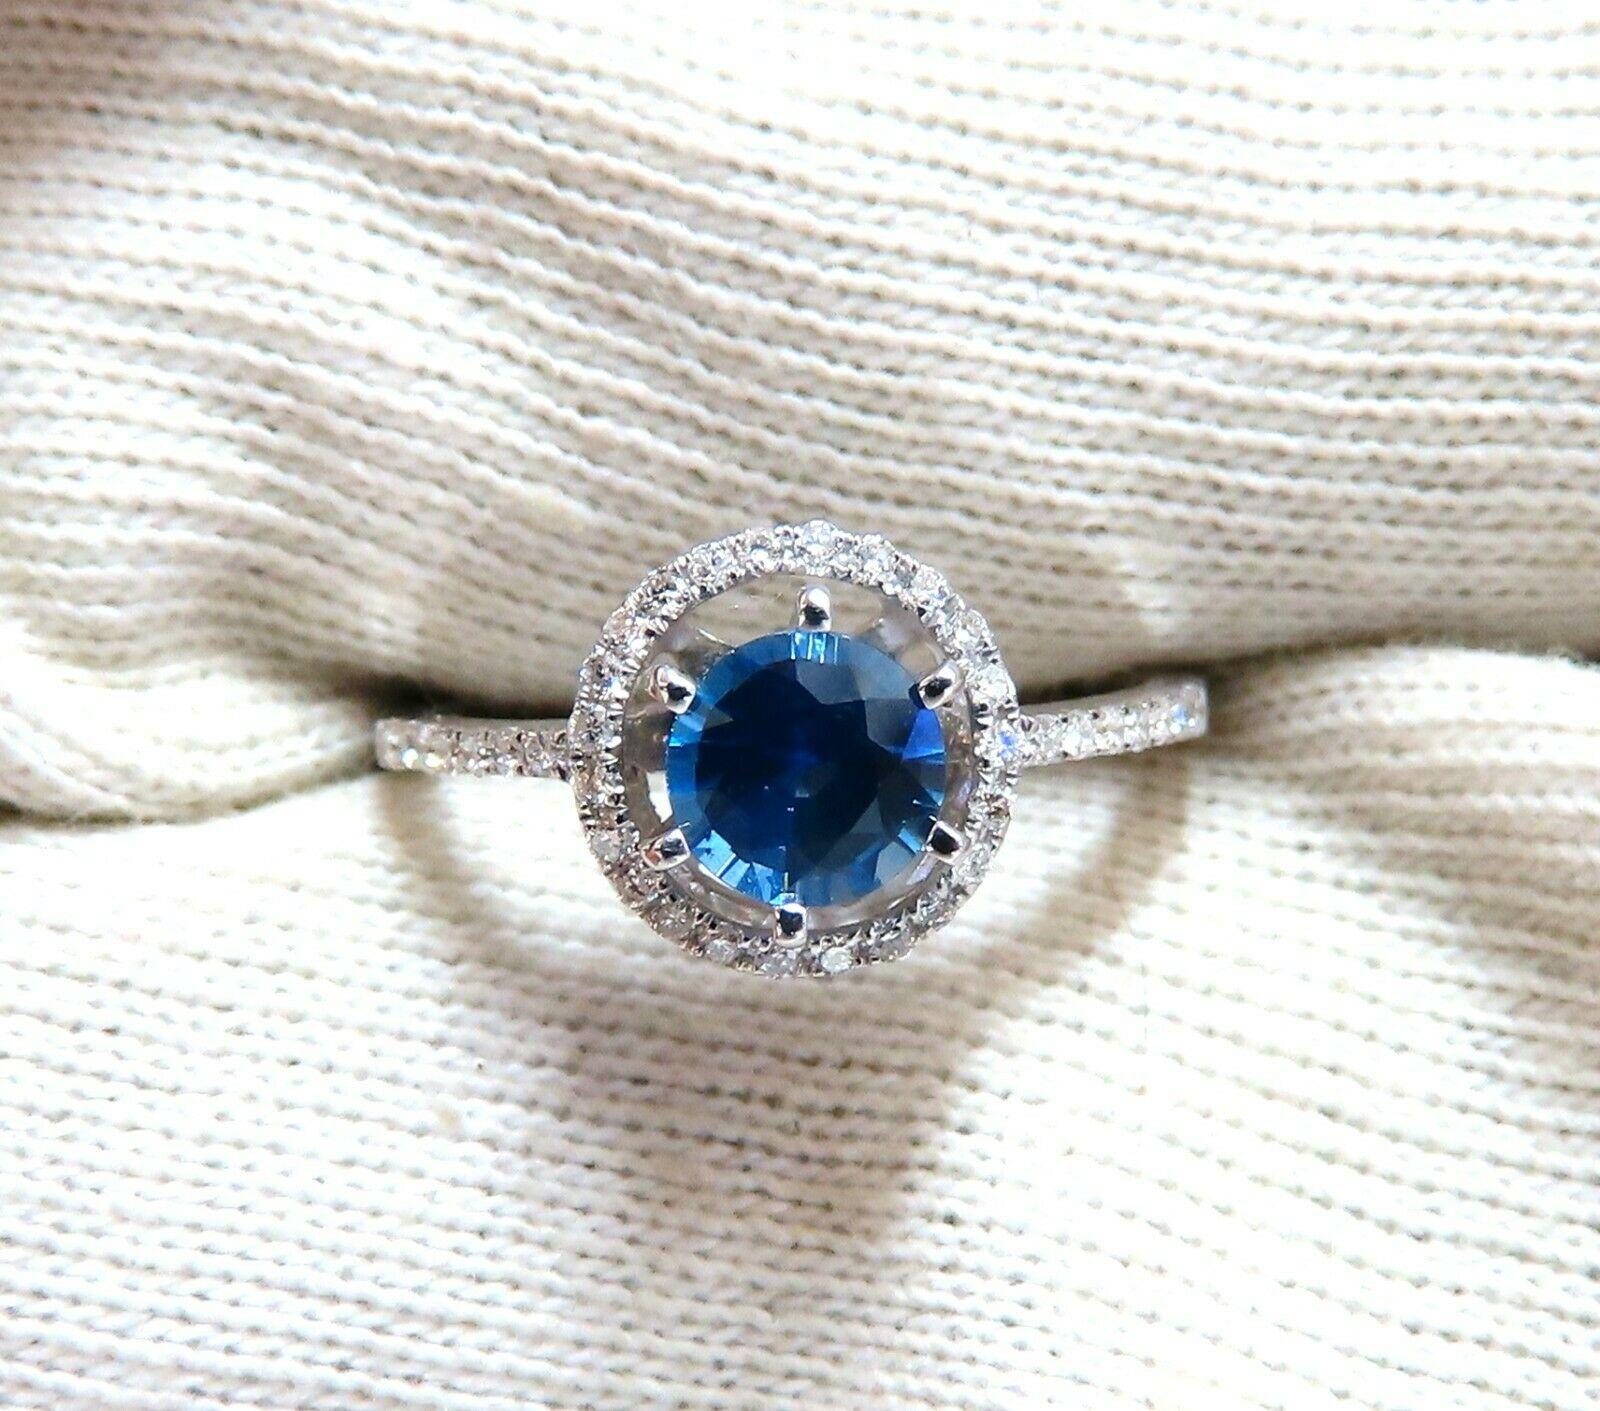 Raised halo Blue.

.82ct Natural Round cut sapphire ring.

Vivid Royal Blue

Clean Clarity & Transparent.

5.6mm

.40ct Natural Side round diamonds.

H-color Vs-2 clarity.

14kt. white gold

2.6 grams

Ring Current size: 7

depth of ring: